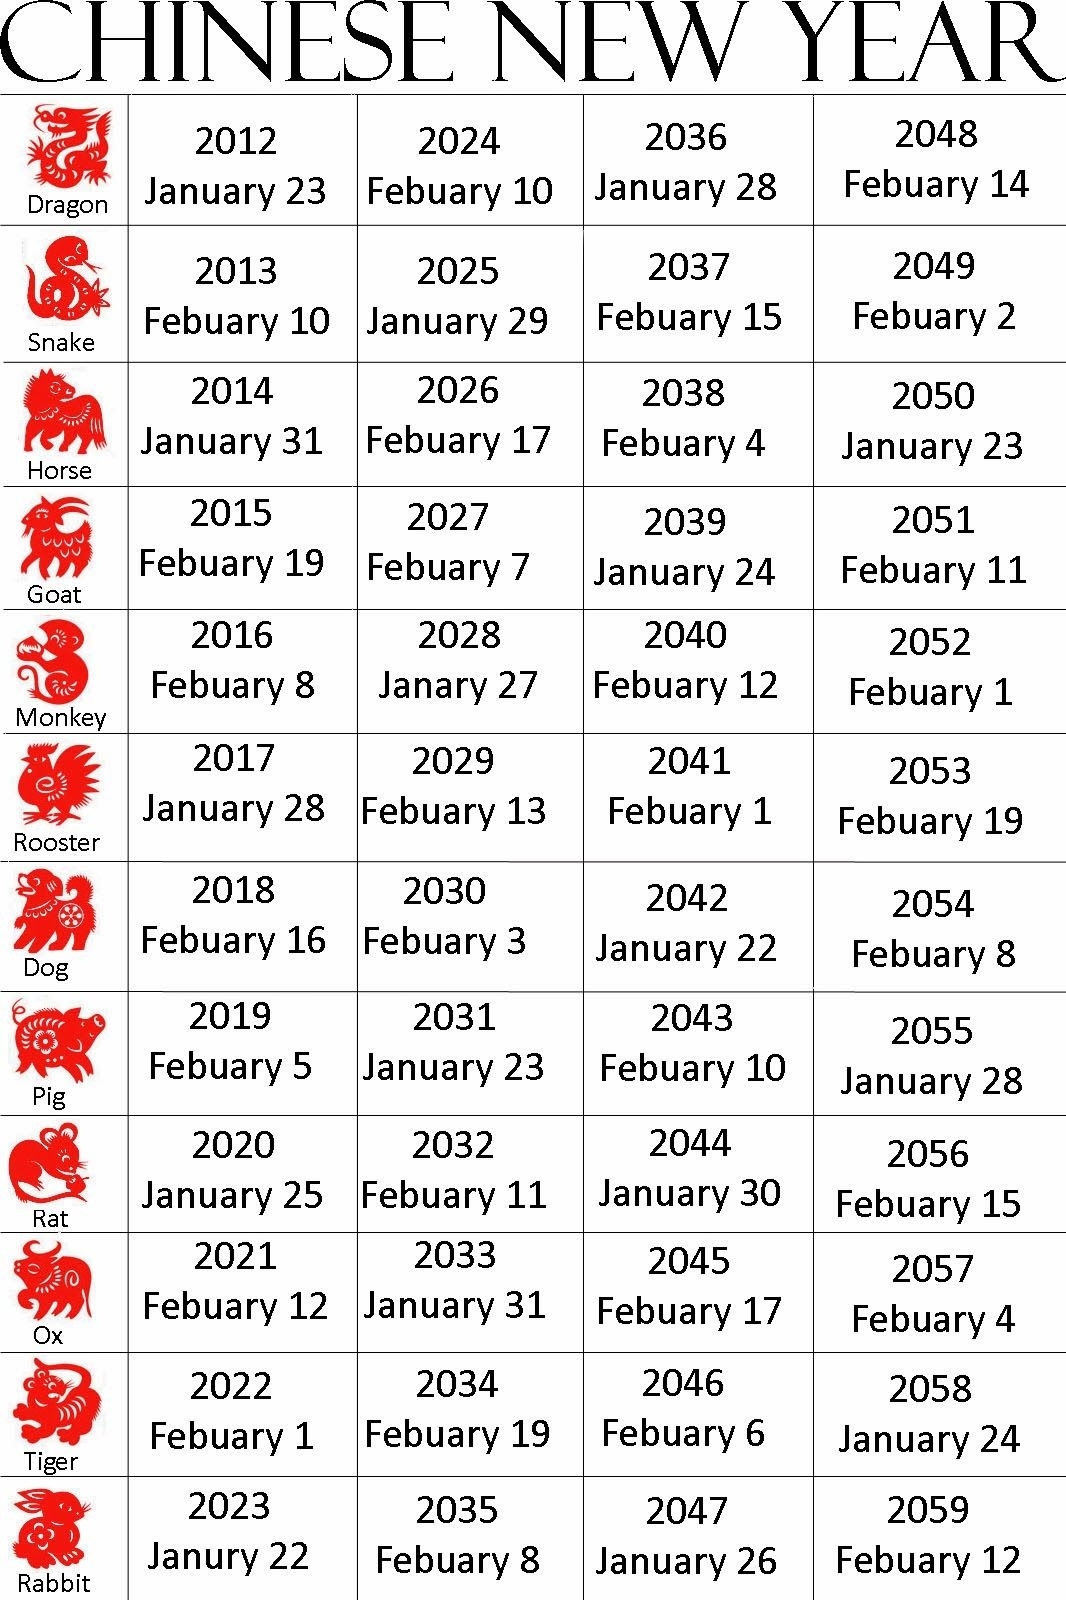 Pin By Laura Porras On Art Ideas | Chinese New Year, Chinese Year Calendar Chinese Zodiac